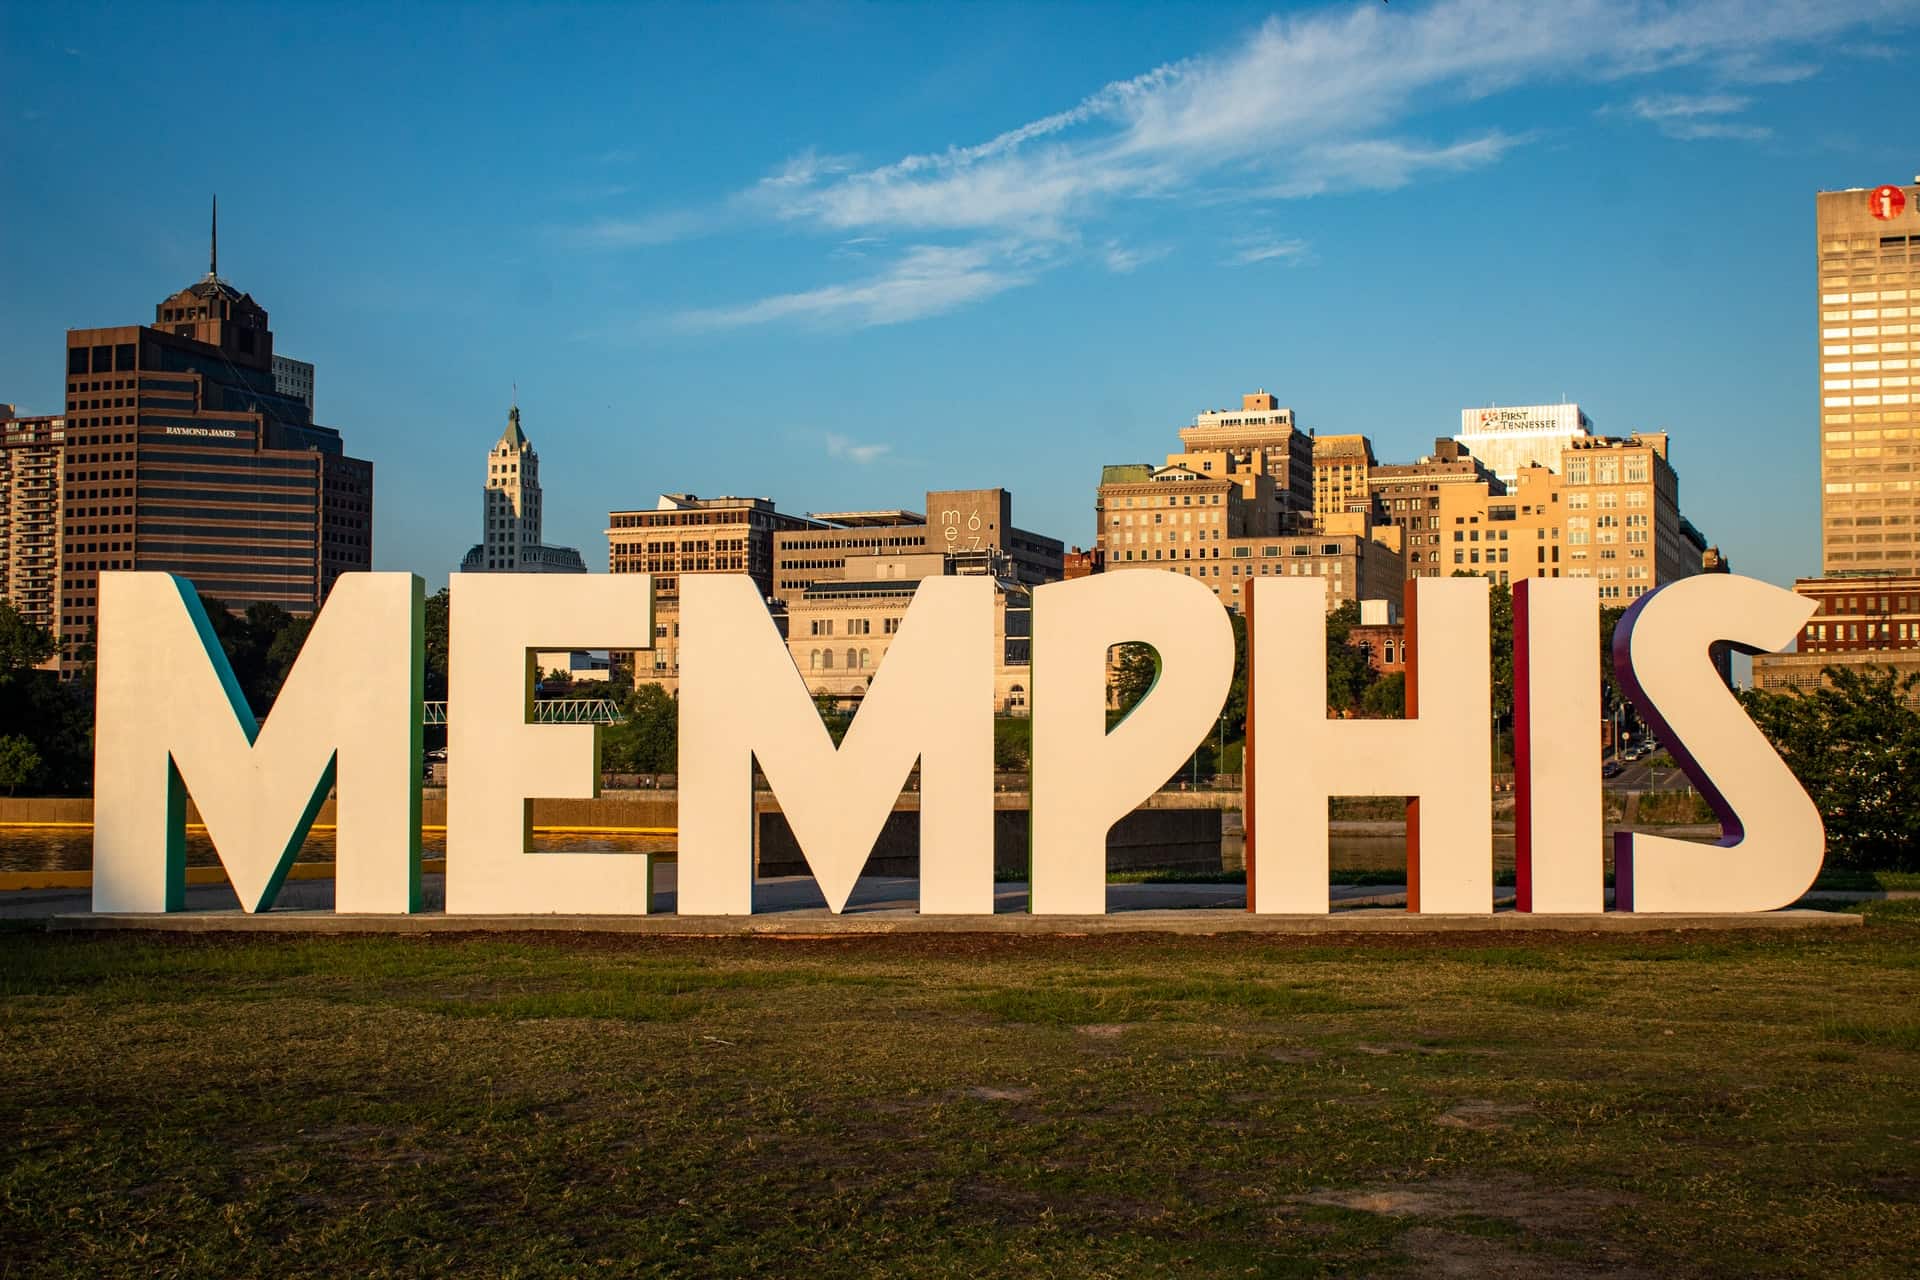 Rhythm and Blues & A River Cruise: 15 Best Things to Do in Memphis